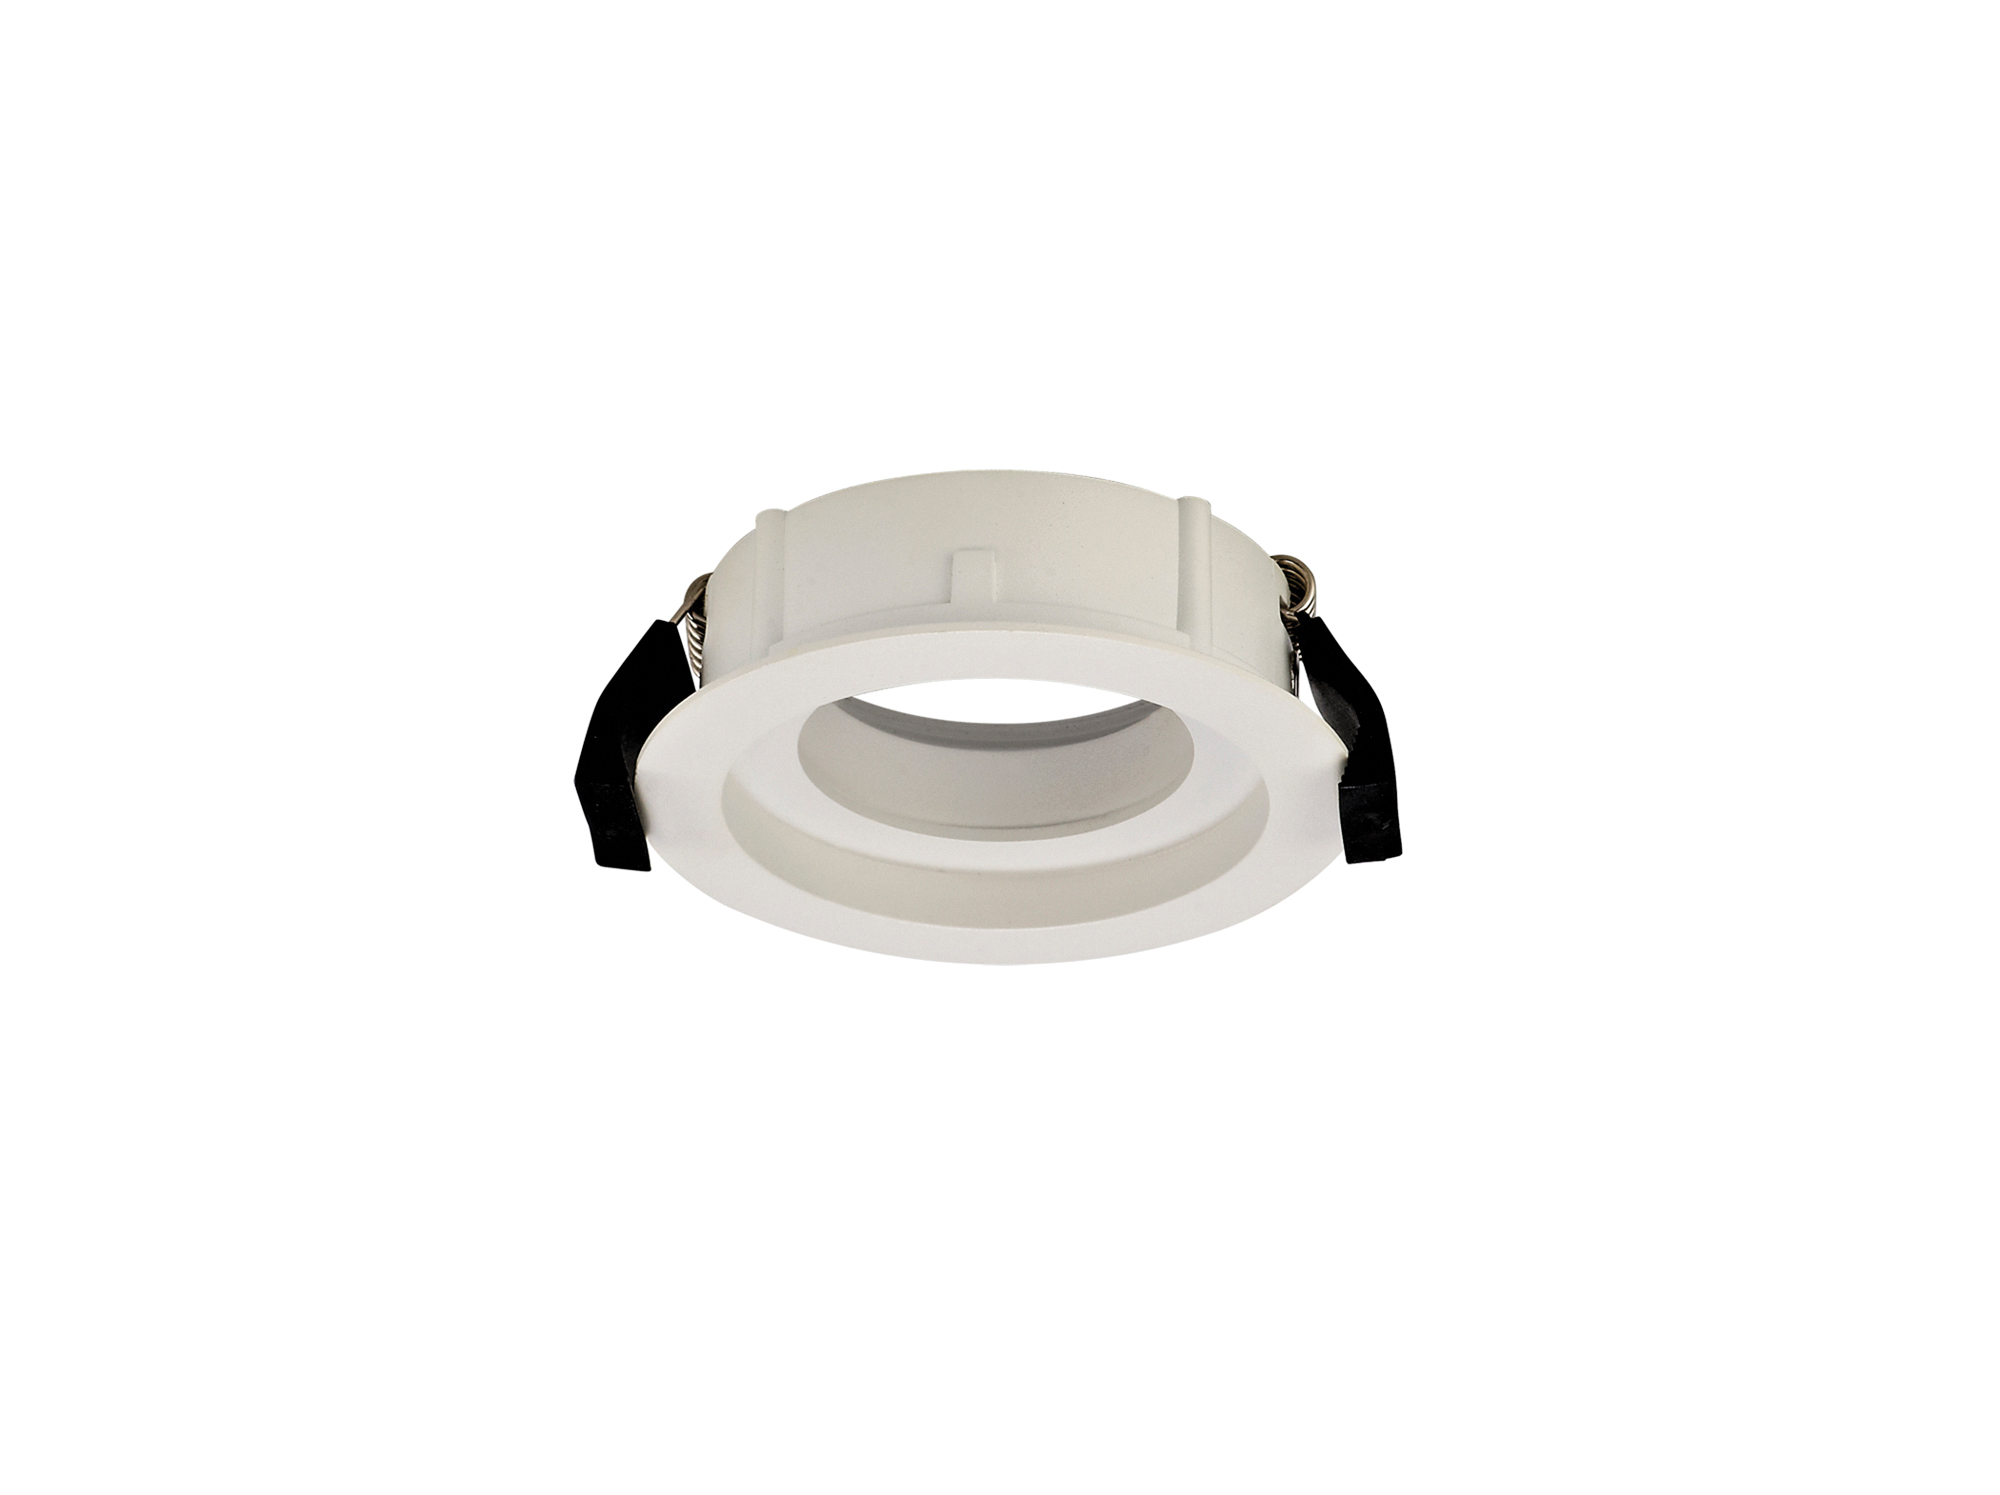 DX200369  Beppe; White Stepped Fixed Recessed Spotlight Frame - LED ENGINE REQUIRED; Dia: 85mm; Cut Out: 76mm; 3yrs Warranty